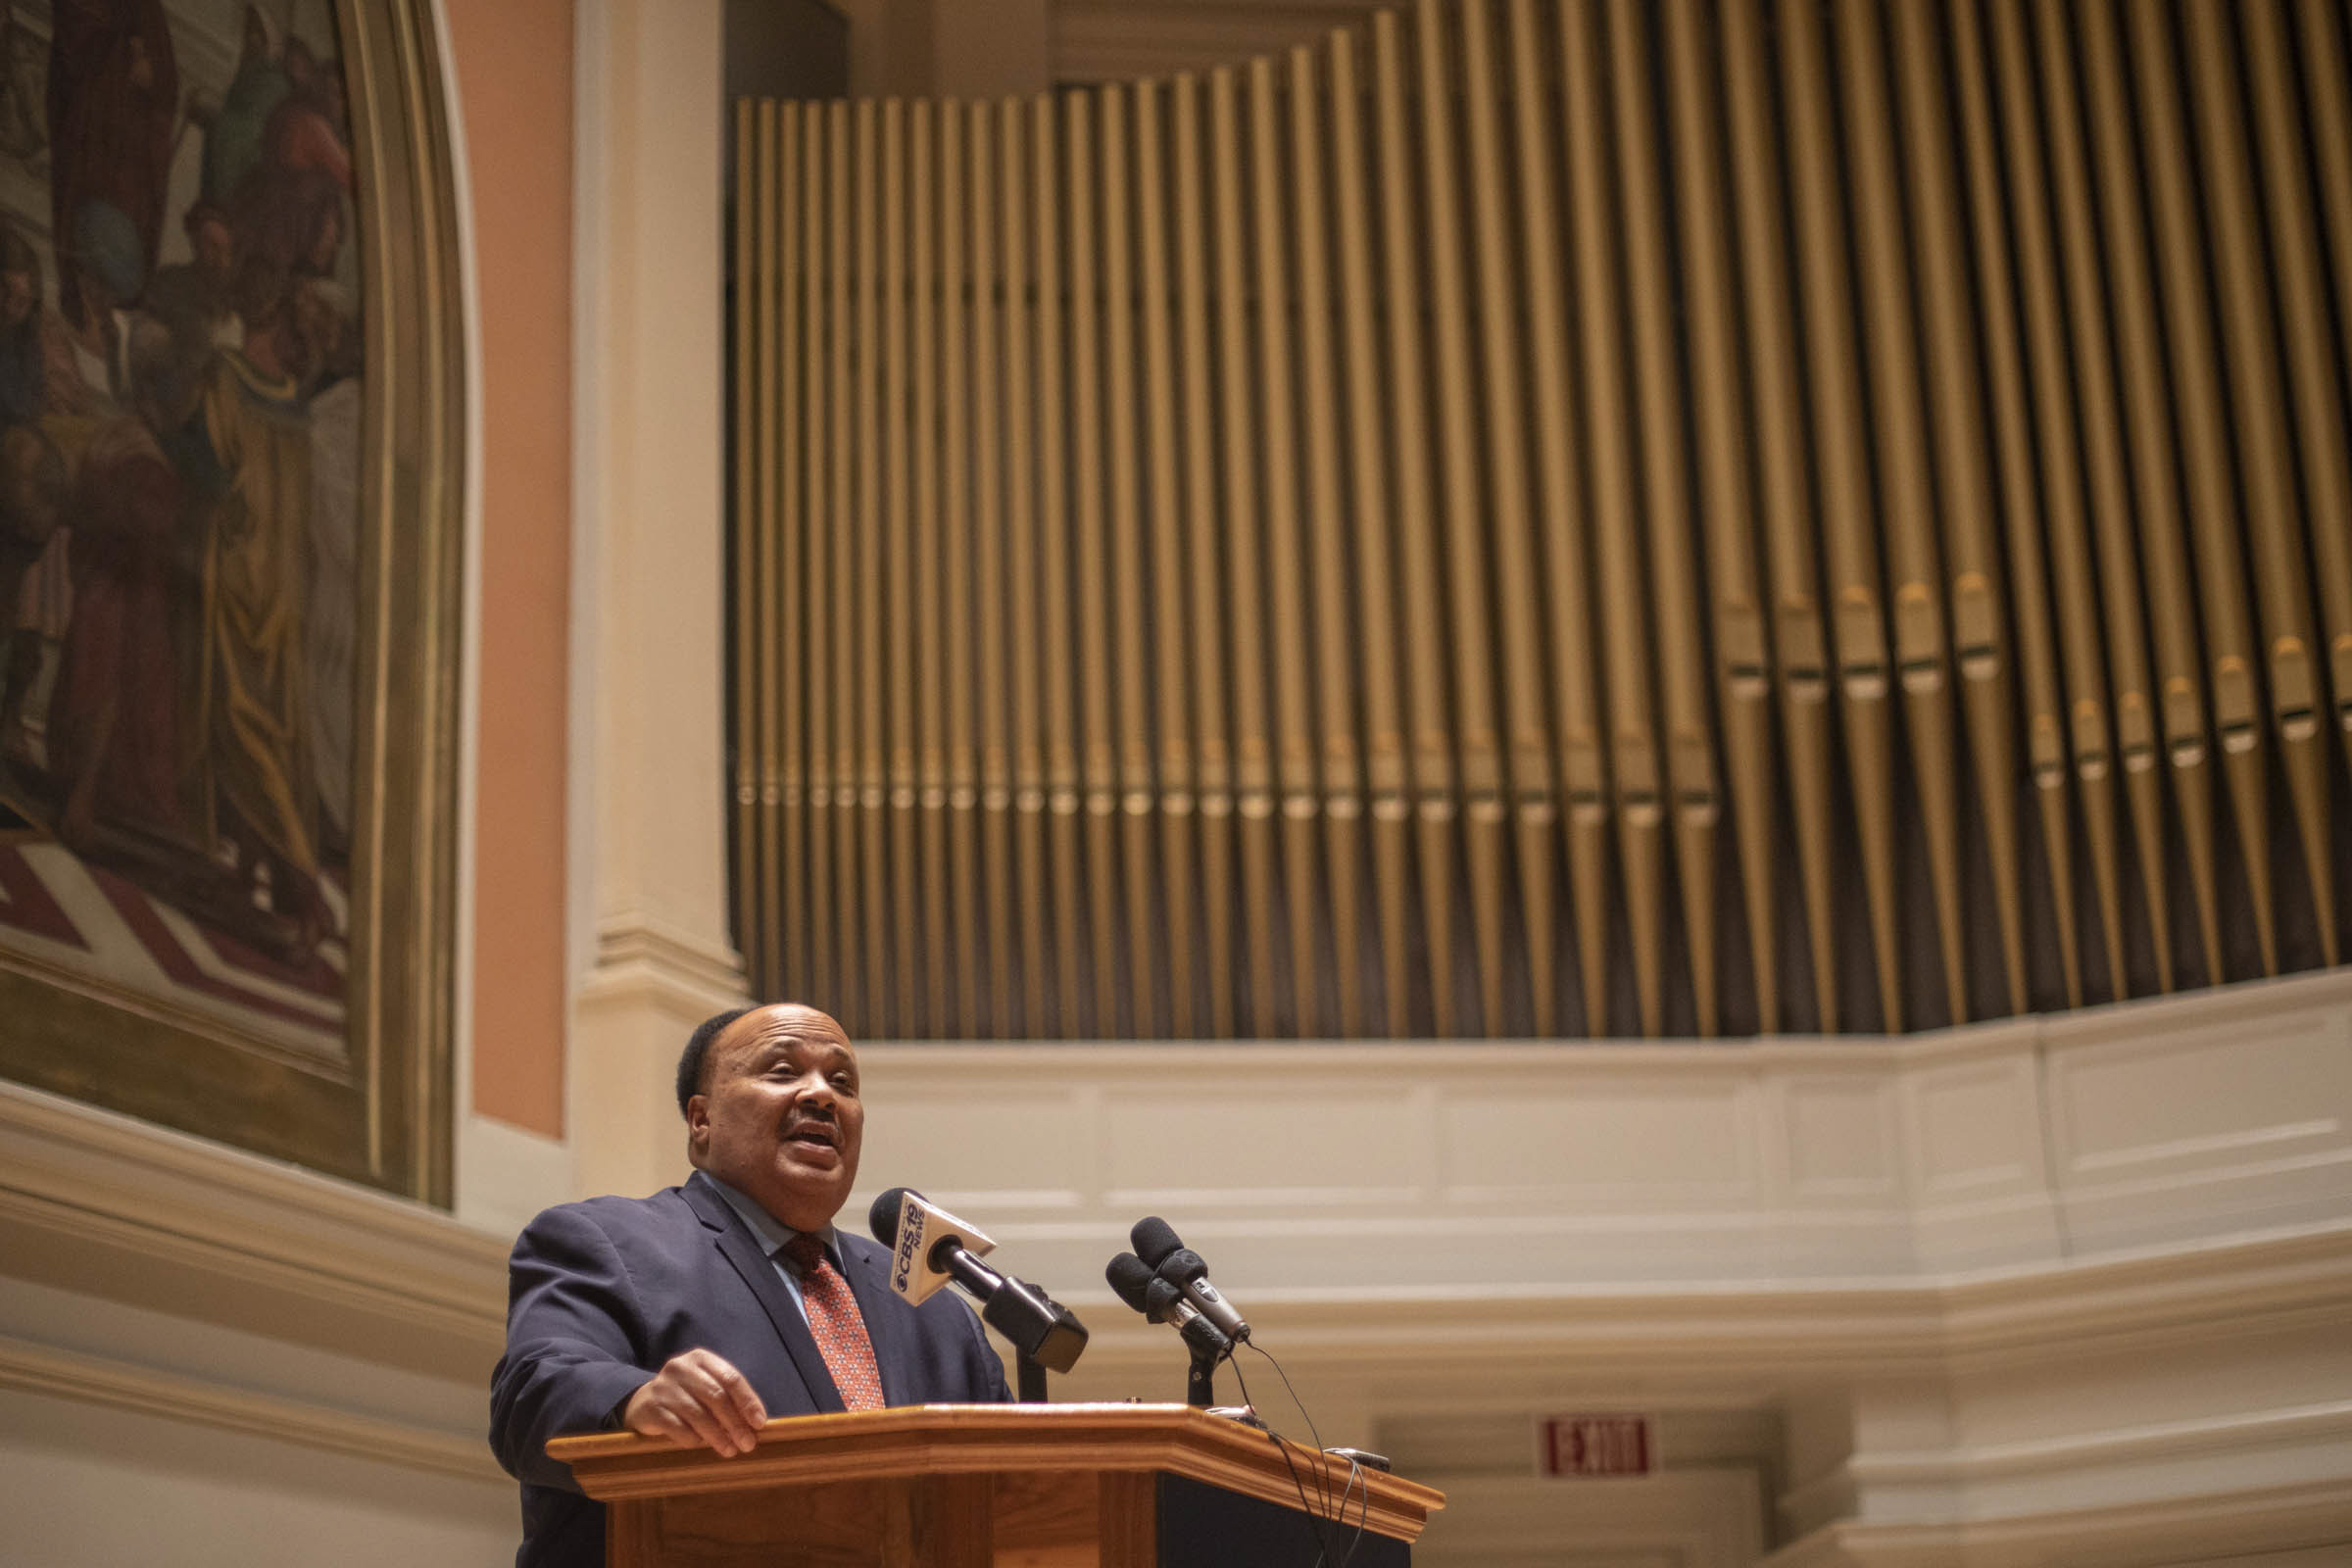 Martin Luther King III speaking at a podium